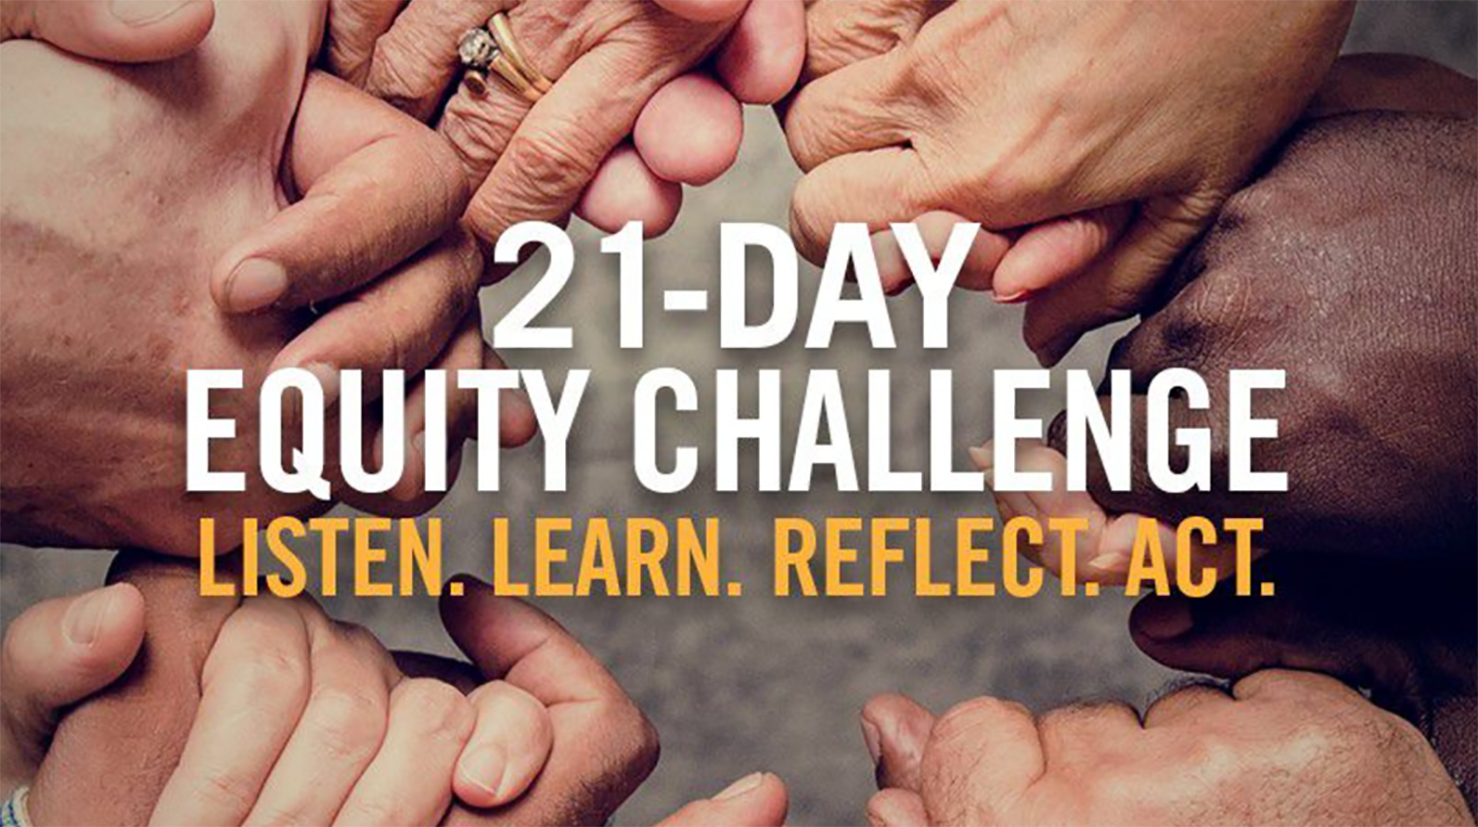 21 - Day Equity Challenge Listen. Learn. Reflect. Act.